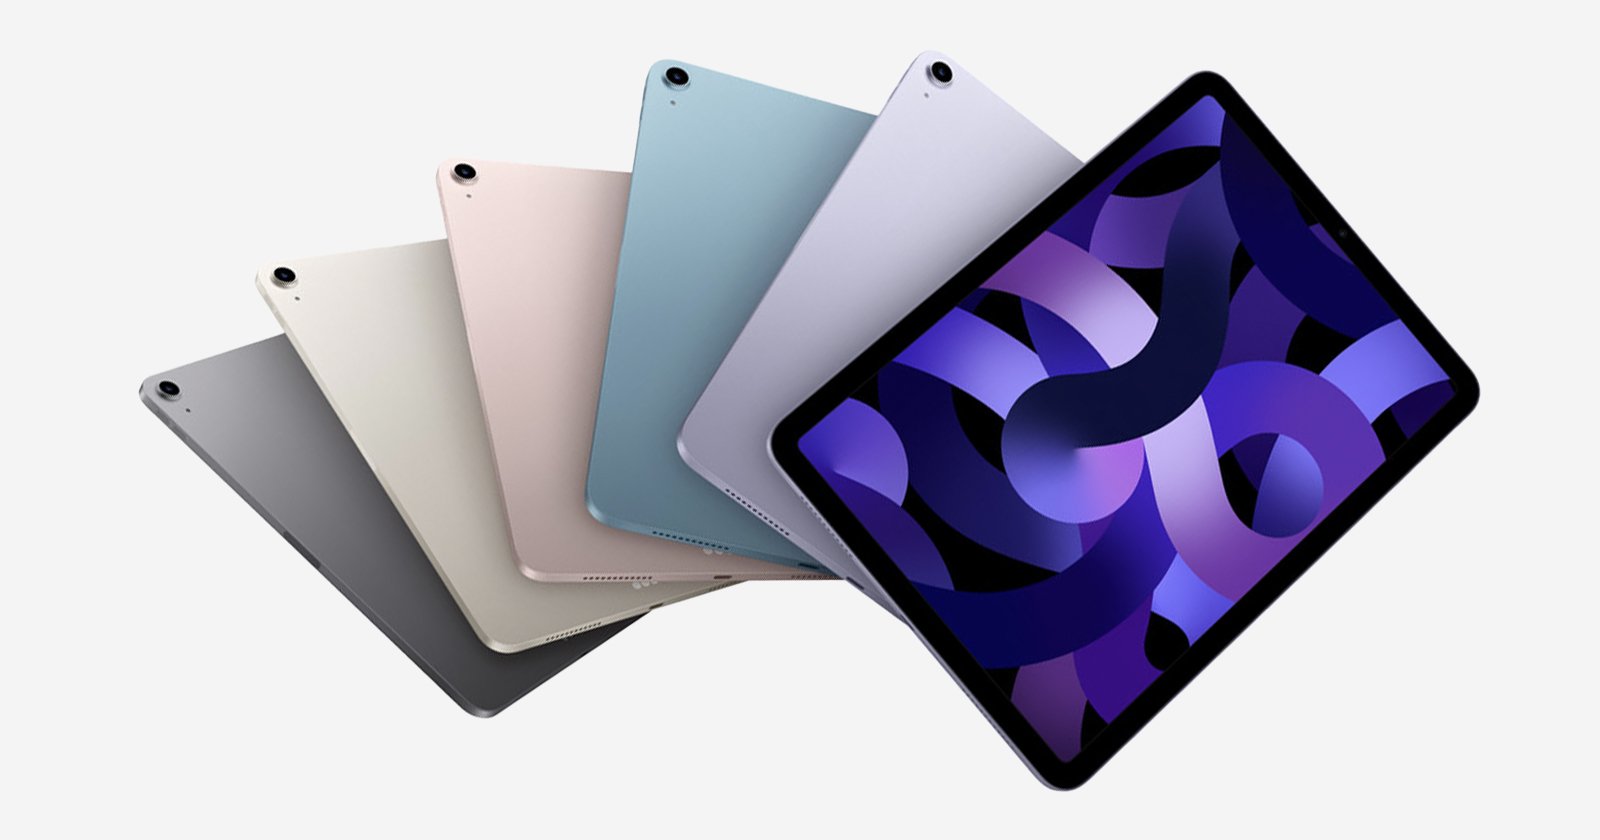 Apple unveils fifth-gen iPad Air with M1 processor, 5G, and new